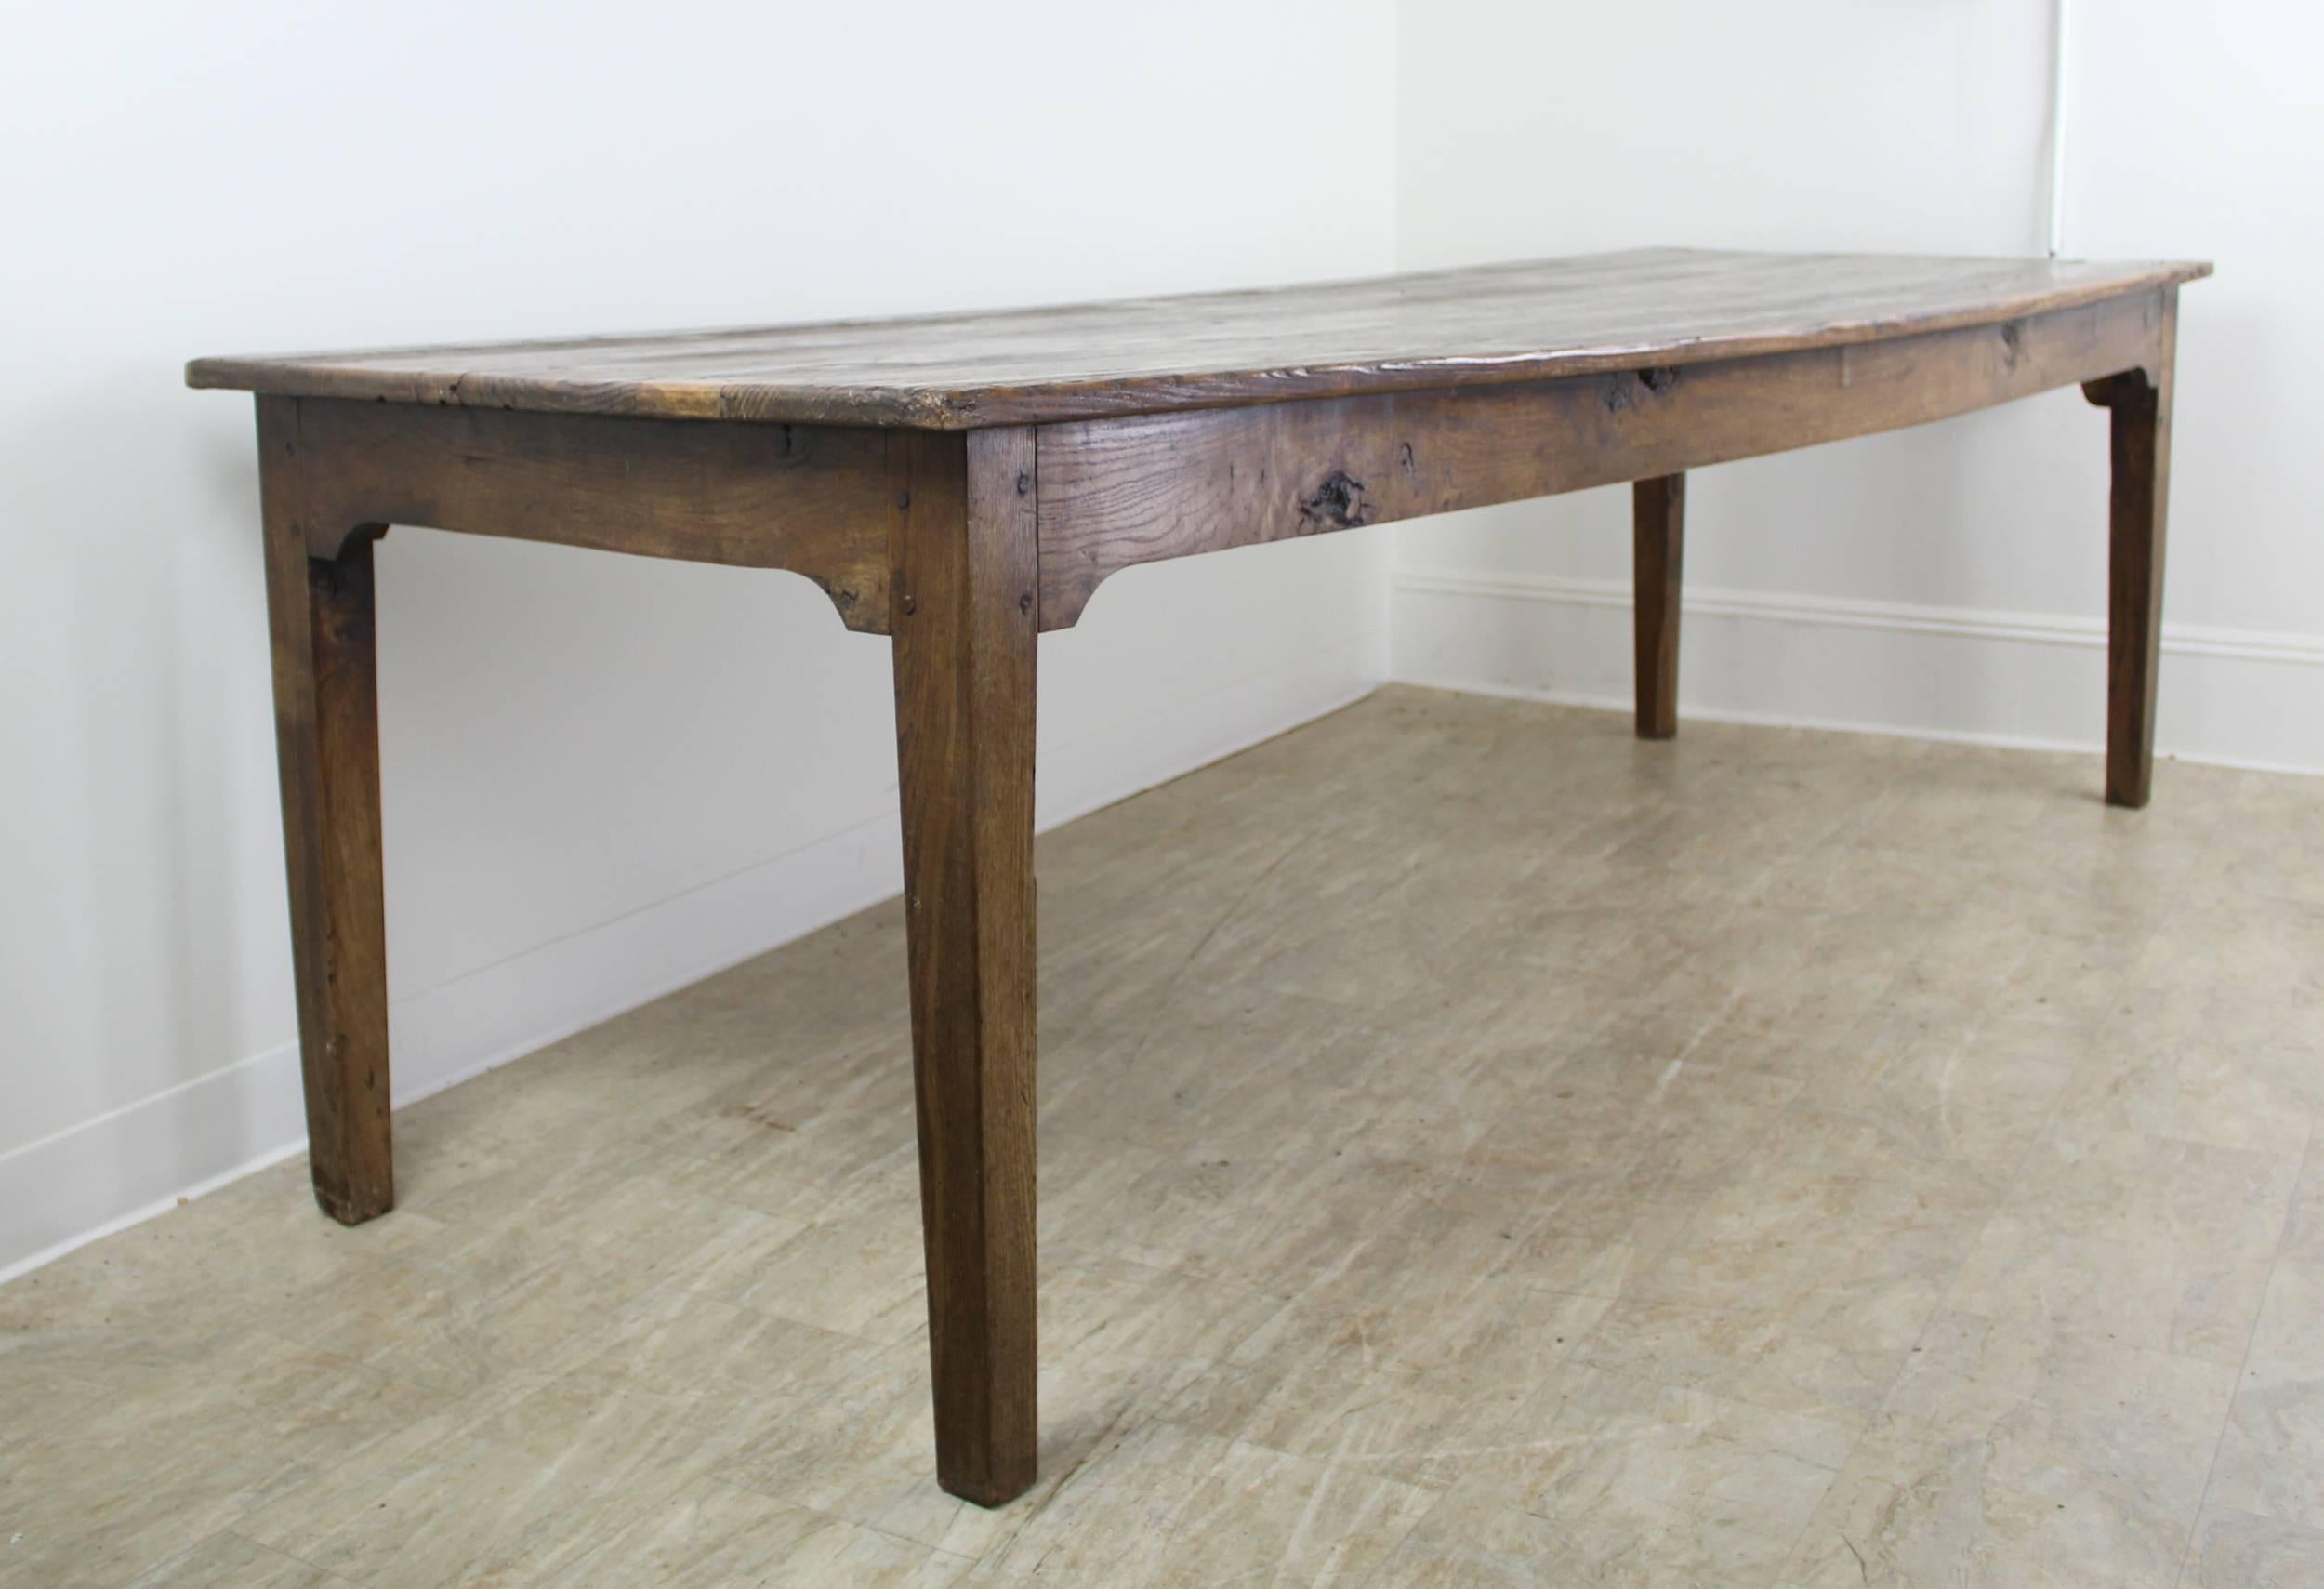 A long rustic pine farm table with glorious pine grain and natural knot holes. The color and patina on this piece are really good. With 92.5 inches between the legs on the long side, this table can seat ten. The apron height of 24.5 inches is good